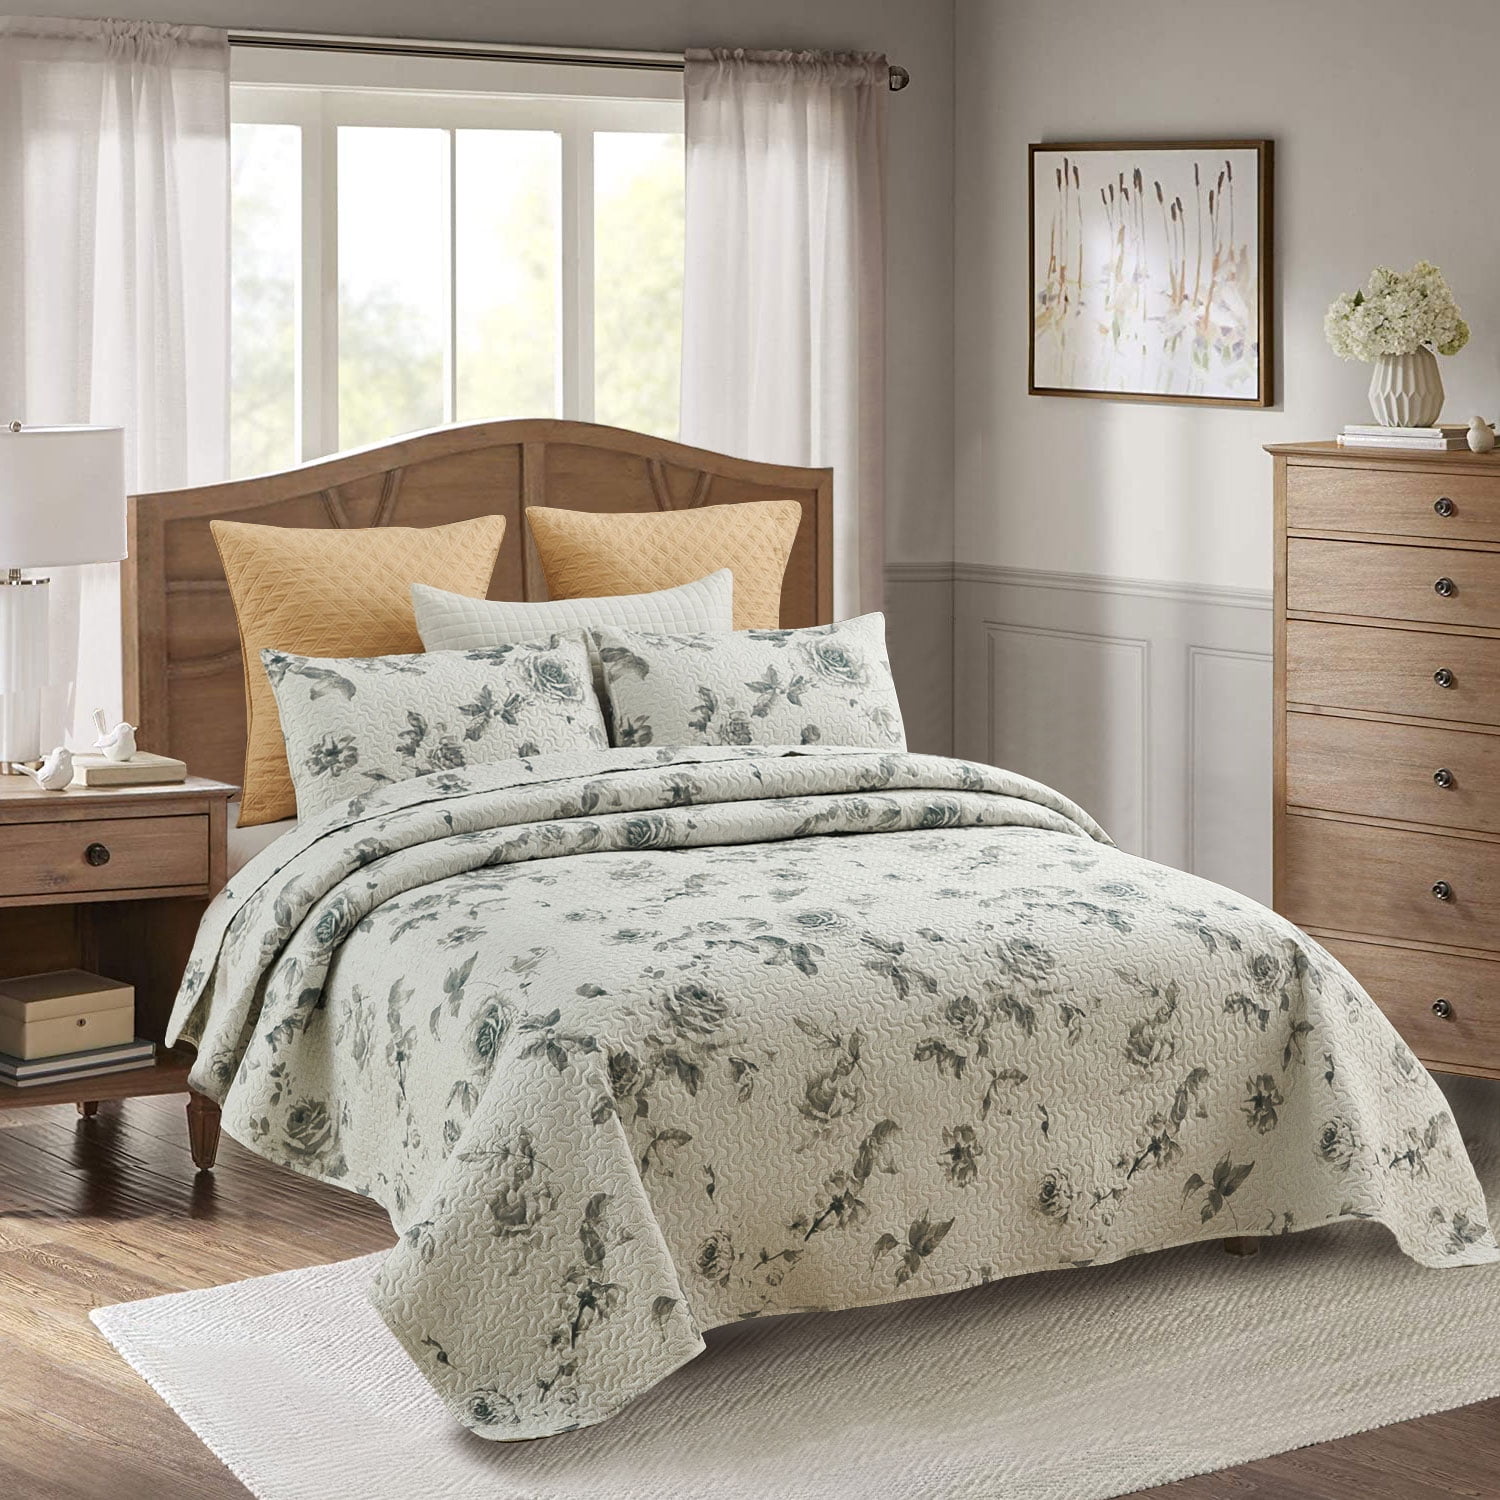 Details about   Wellbeing Hypoallergenic Printed King/Cal King Bedding Comforter Sets Microfiber 